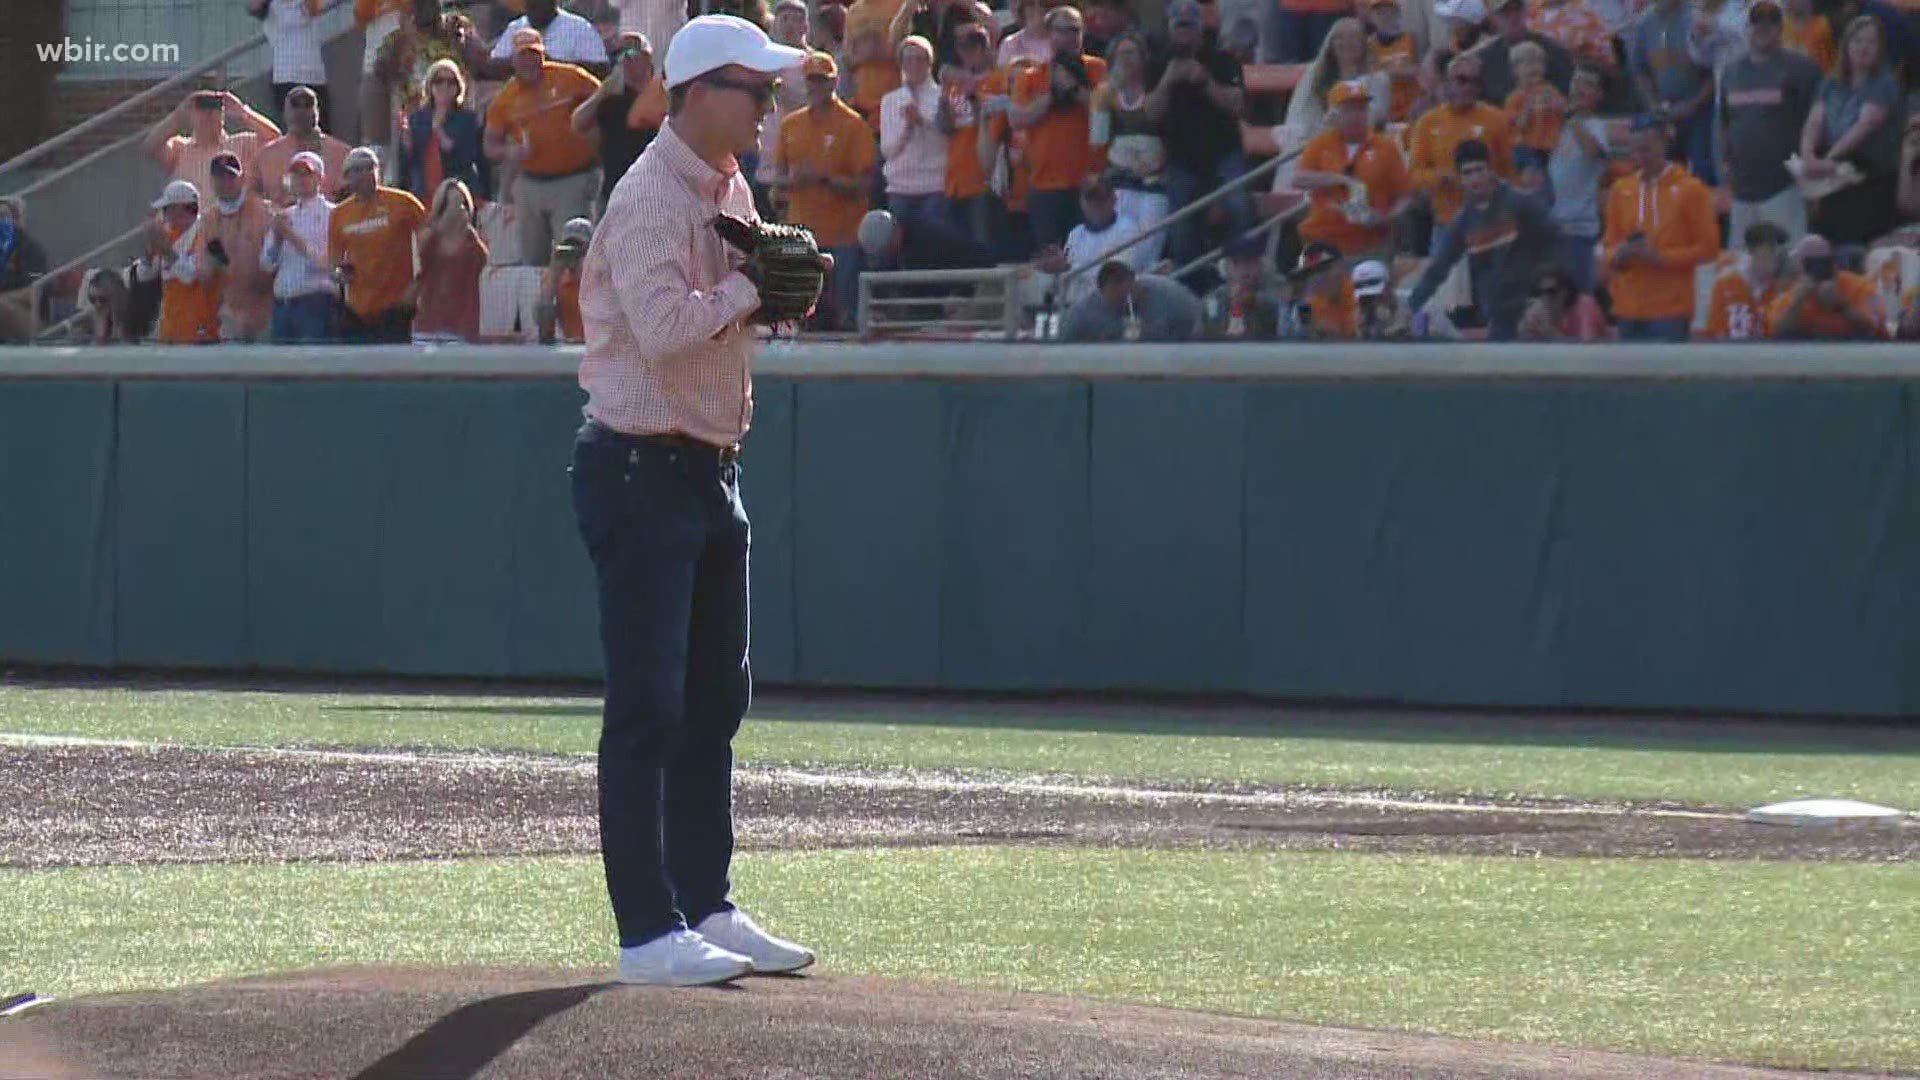 A crowd of nearly 4,300 filled the stadium to see the Sheriff put some heat behind the ceremonial first pitch before the Vols took on No. 1 Arkansas.